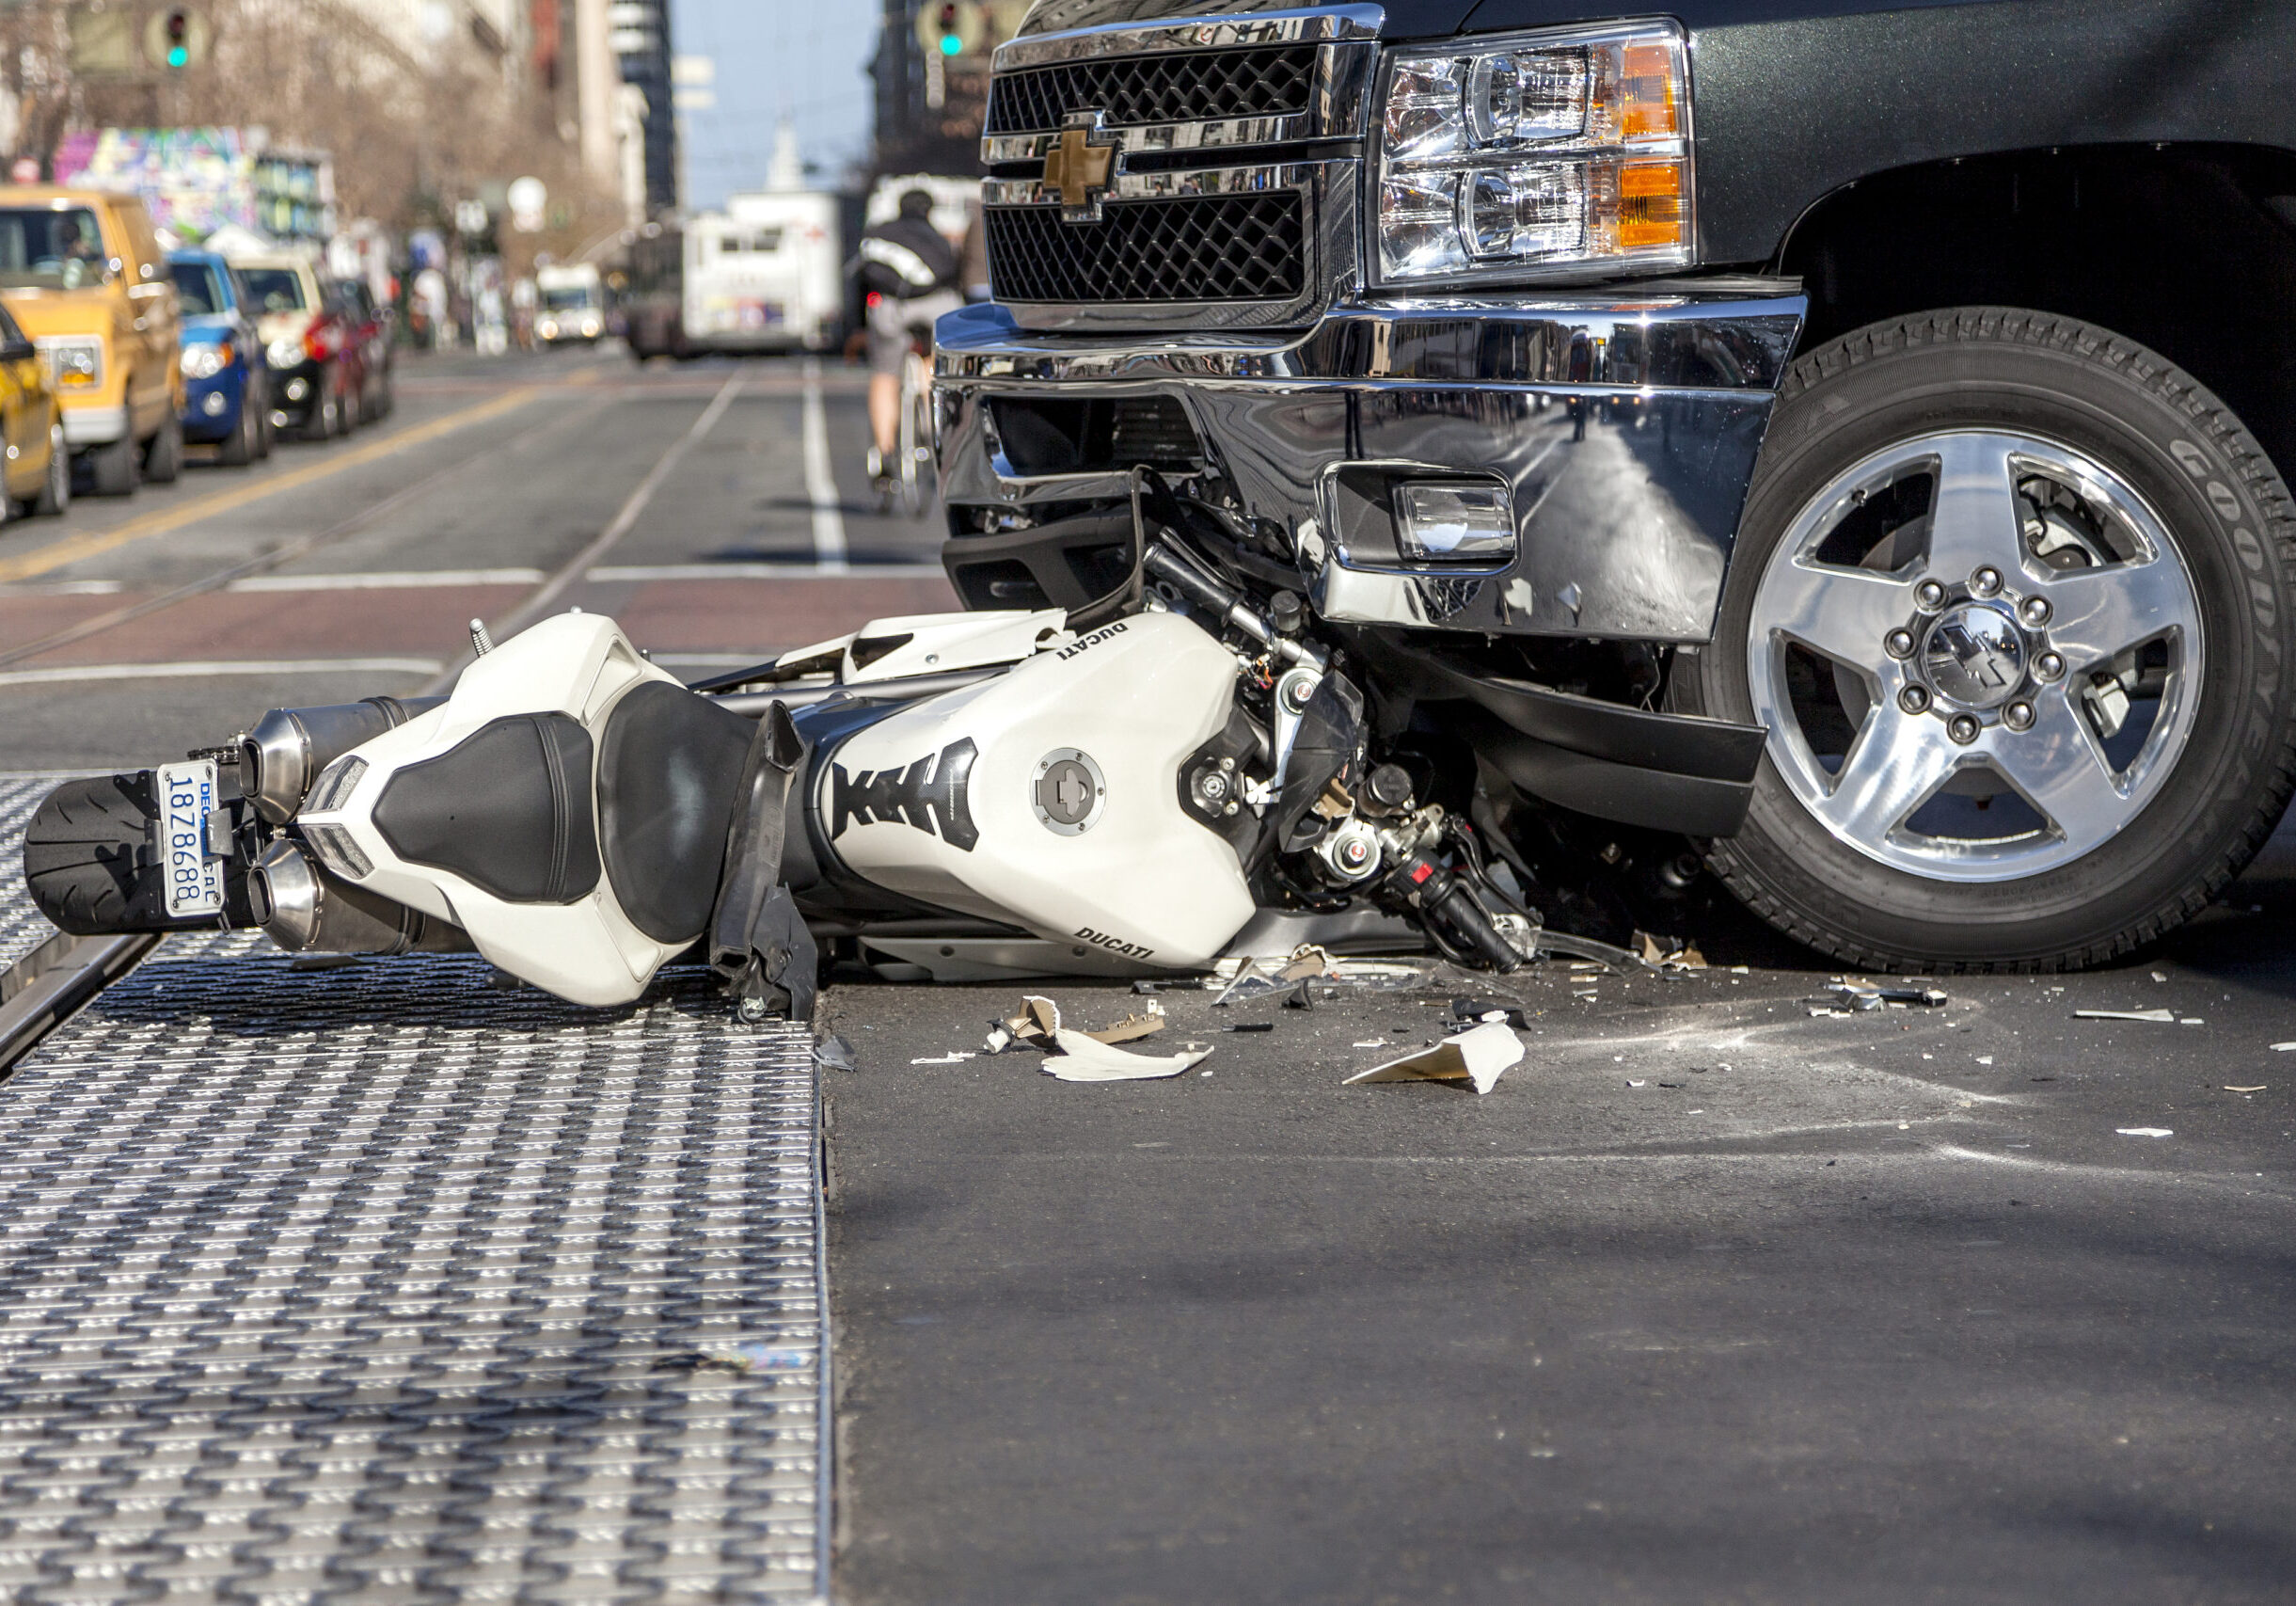 San Francisco, USA - January 23, 2014: A bad traffic accident between a white Ducati motorcycle and Chevy pickup truck occurred on Market street in the late afternoon and brought traffic to a halt, backing up Muni buses and light rain trains. No fatalities were reported.